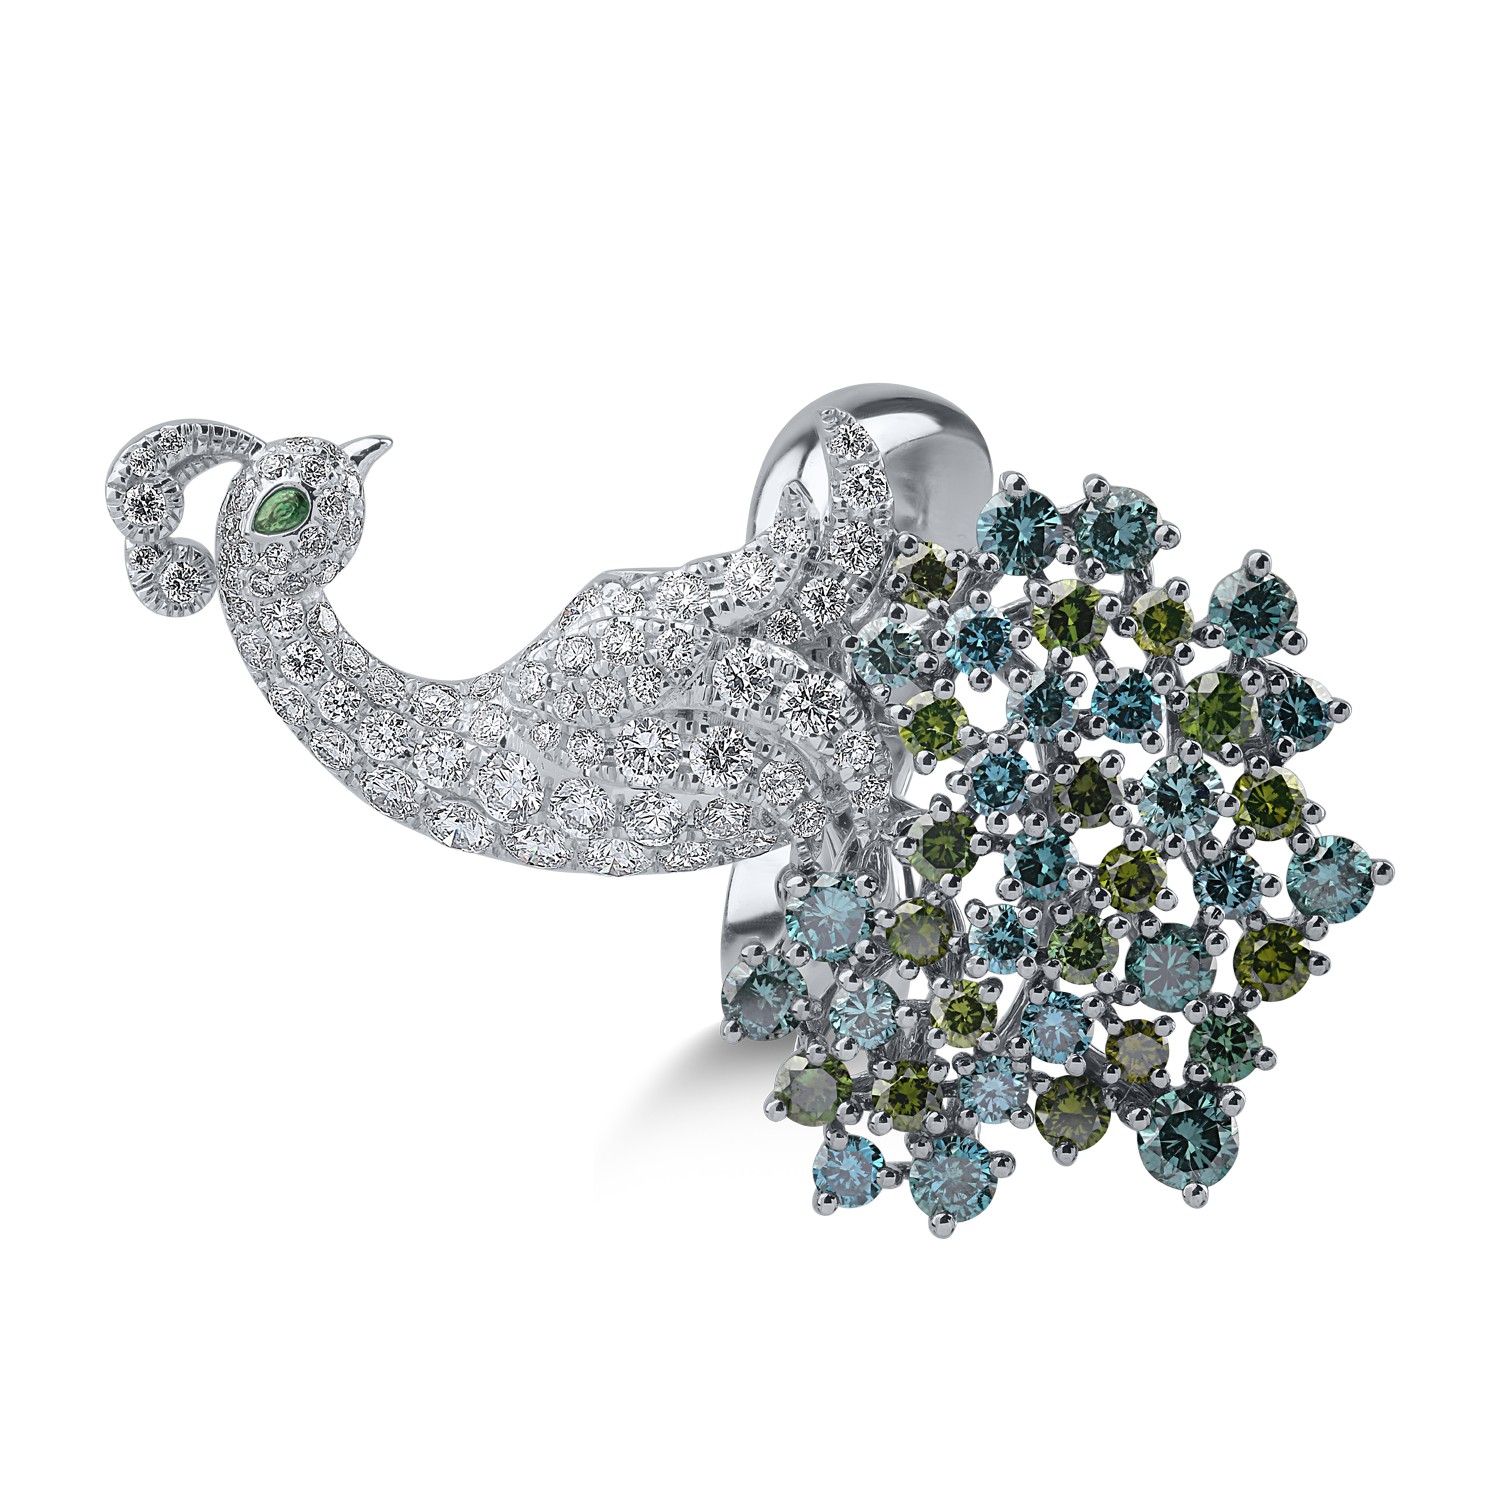 White gold ring with 3.32ct diamonds and 0.02ct green garnet